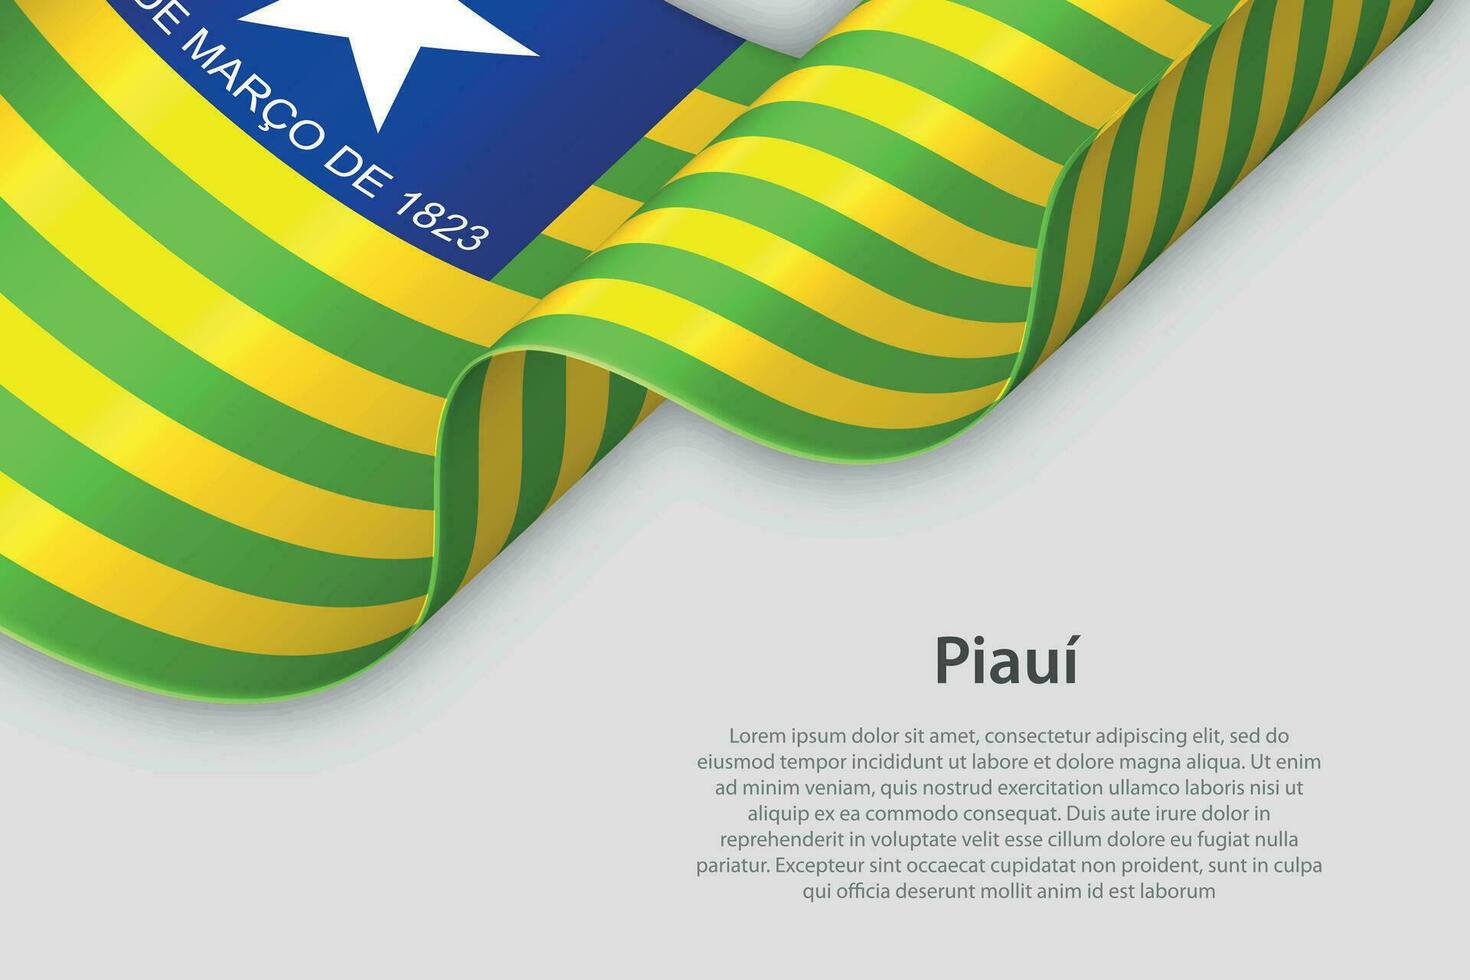 3d ribbon with flag Piaui. Brazilian state. isolated on white background vector